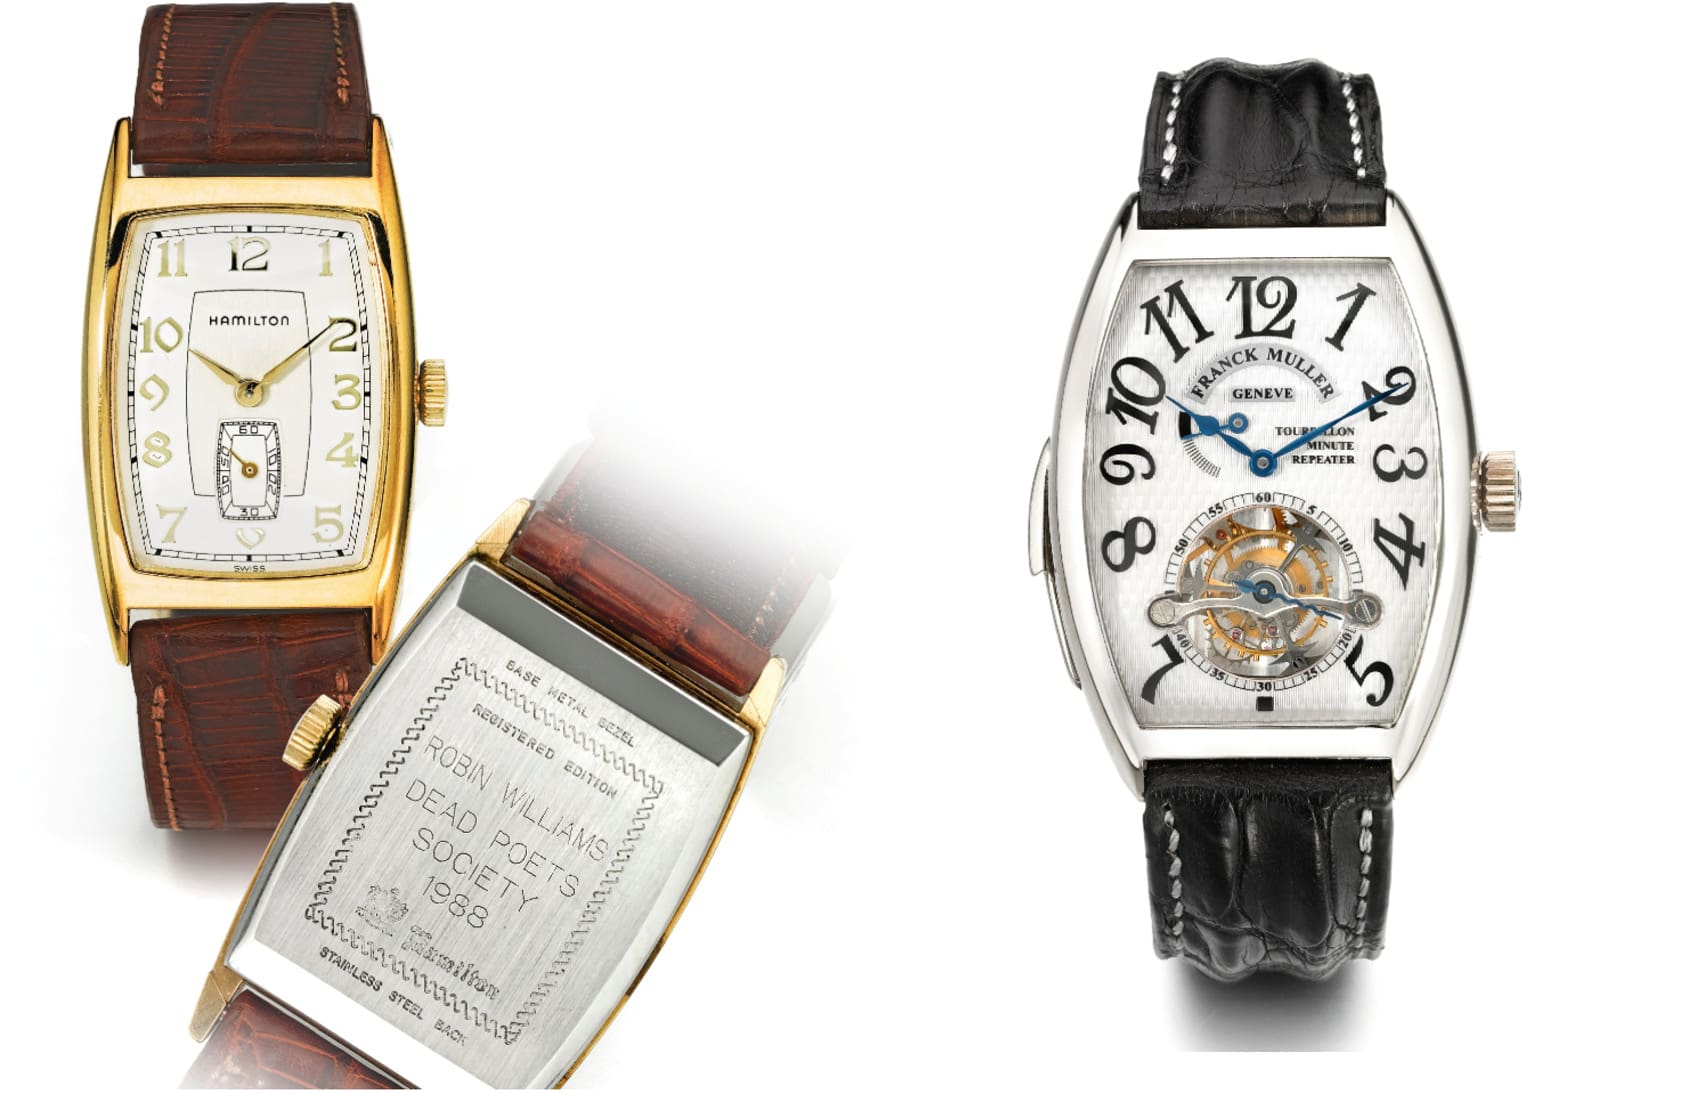 NEWS: All watches sell at Sotheby’s auction of Robin Williams’ collection